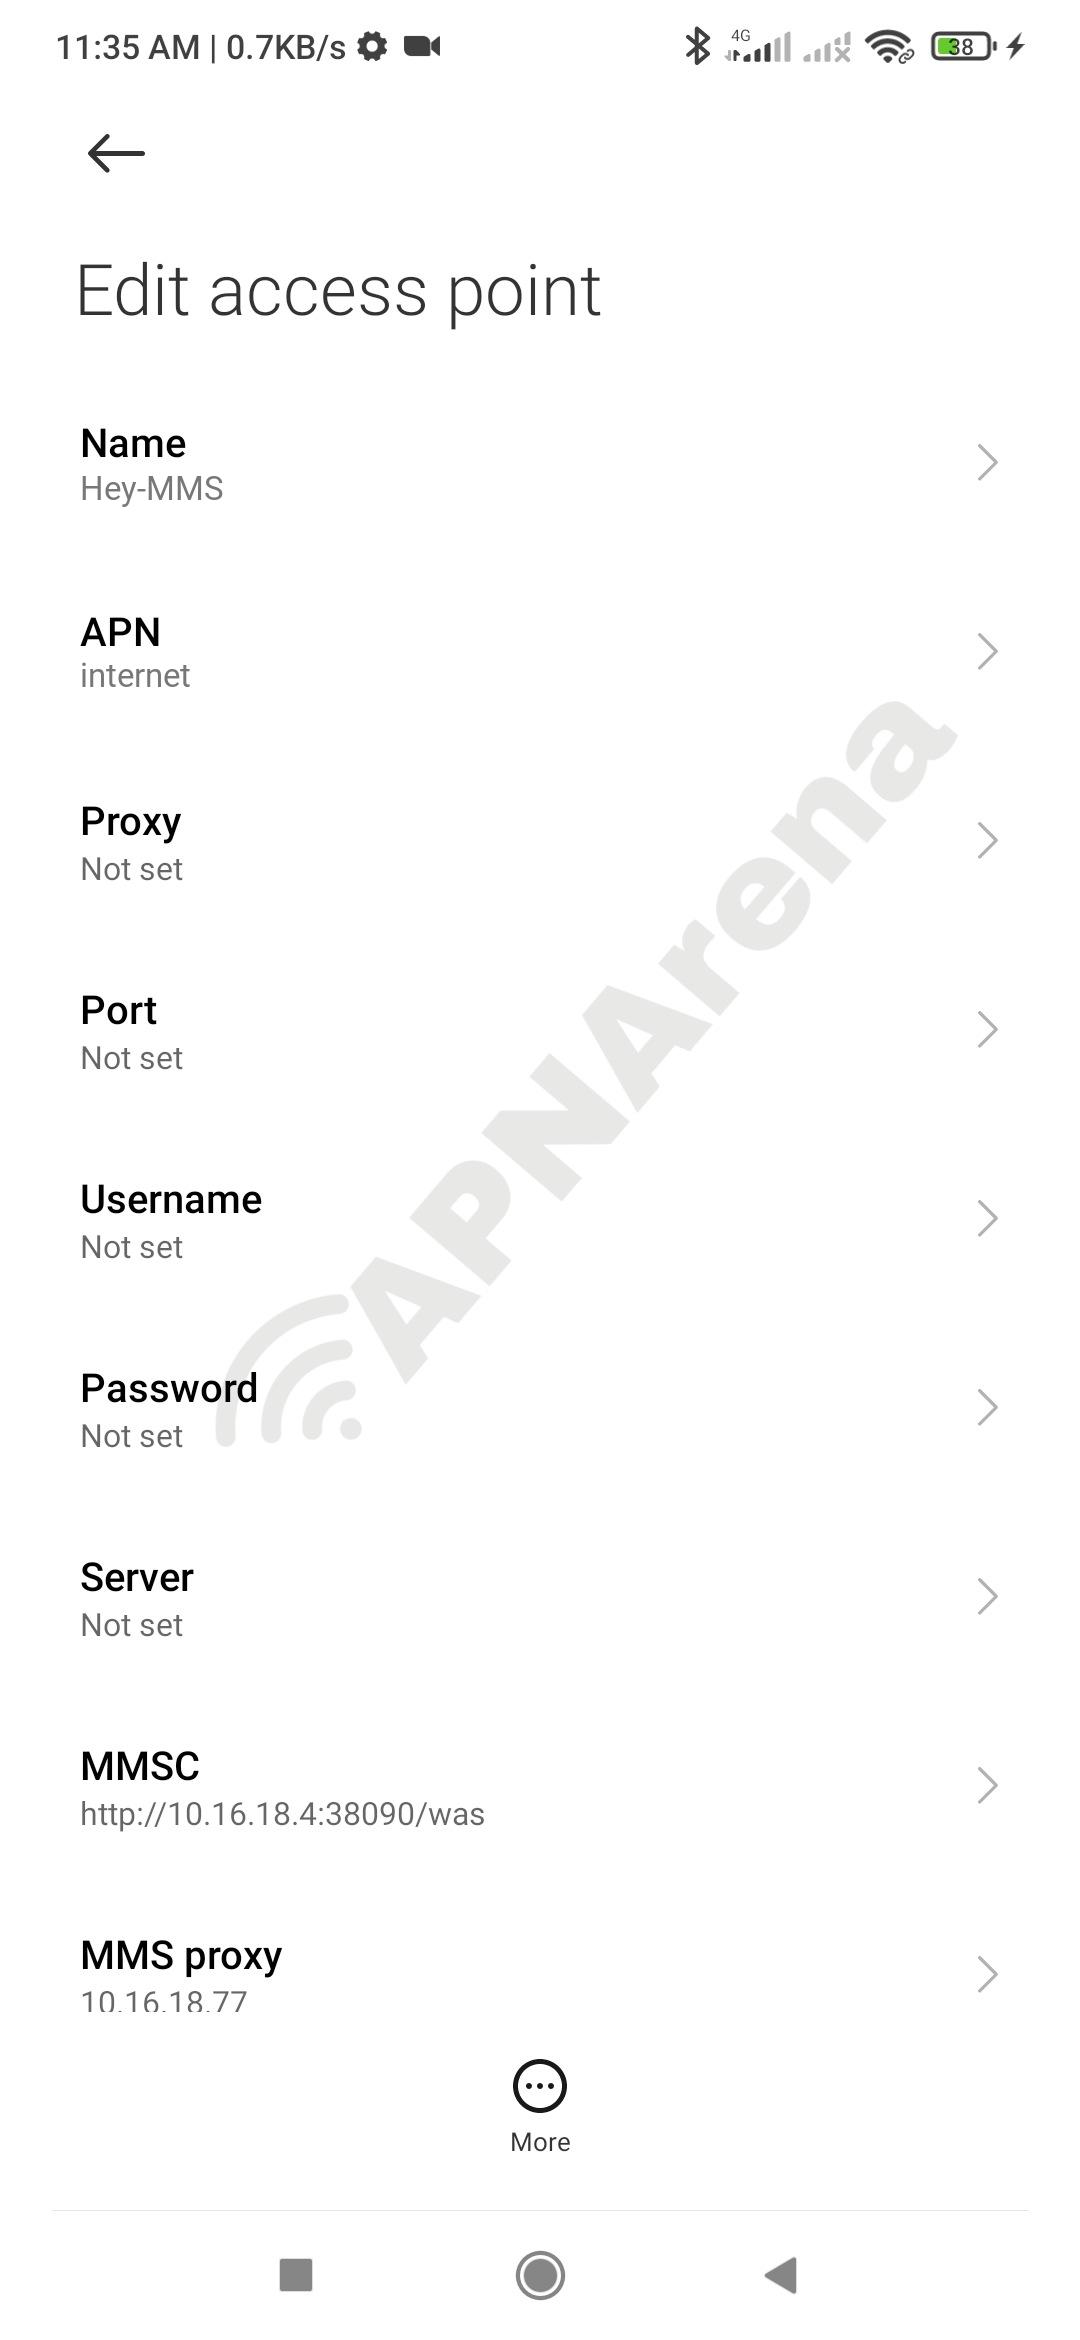 Hey (Vodafone, Kall) MMS Settings for Android